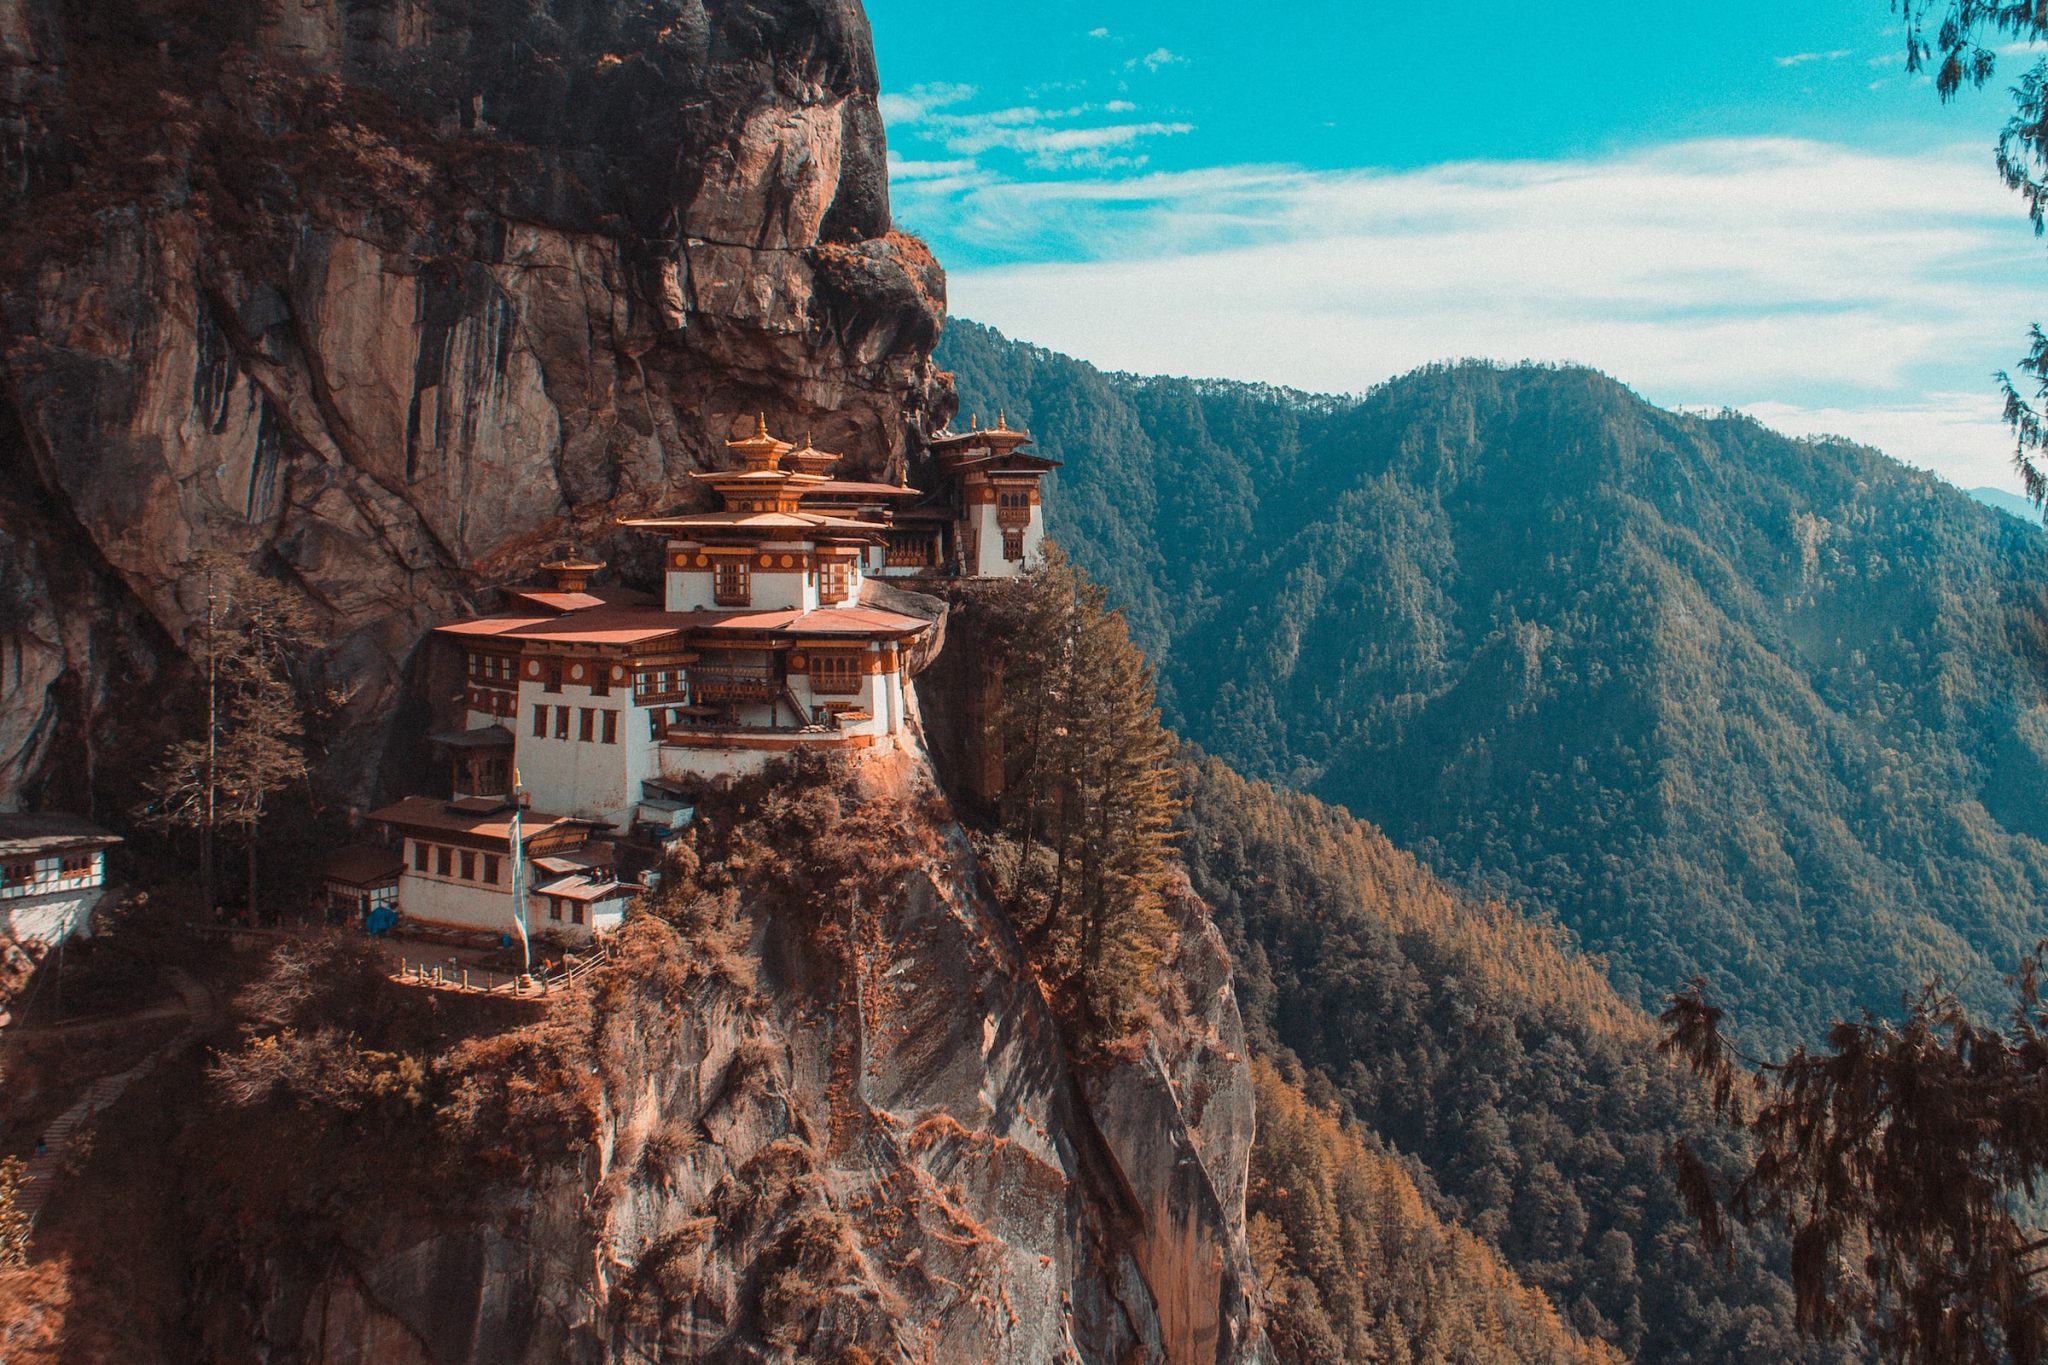 Tiger’s Nest, Taktsang Trail, Paro, Bhutan. The country of Bhutan is implementing a more quality-based approach to tourism.